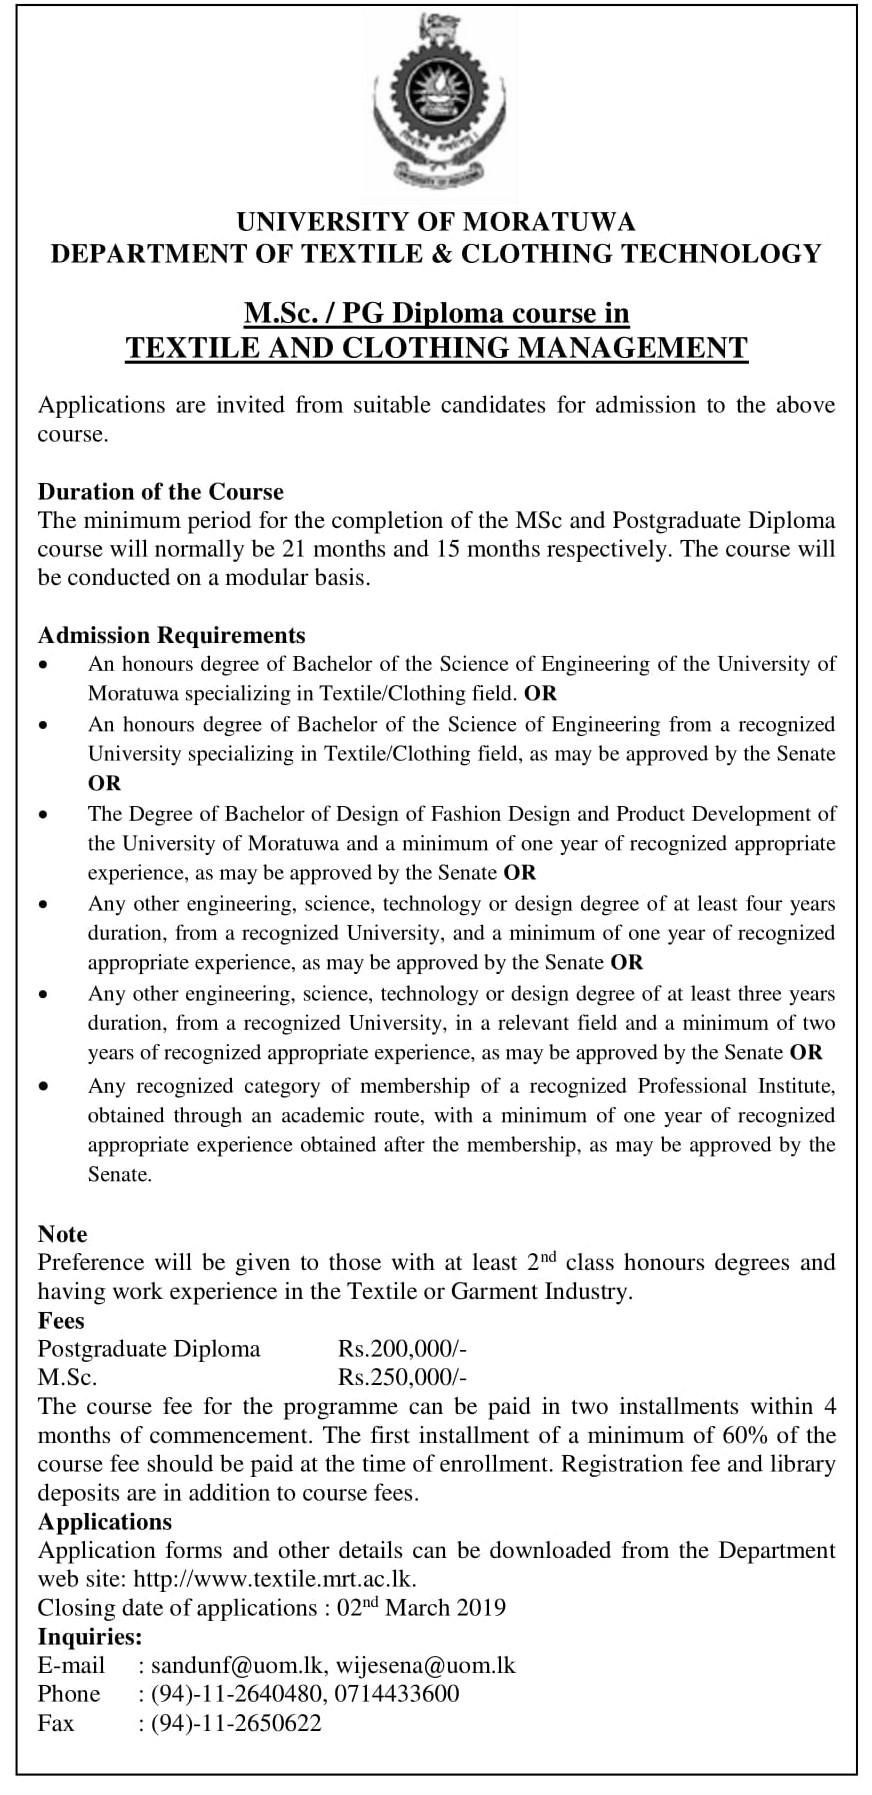 MSc/PG Diploma in Textile and Clothing Management